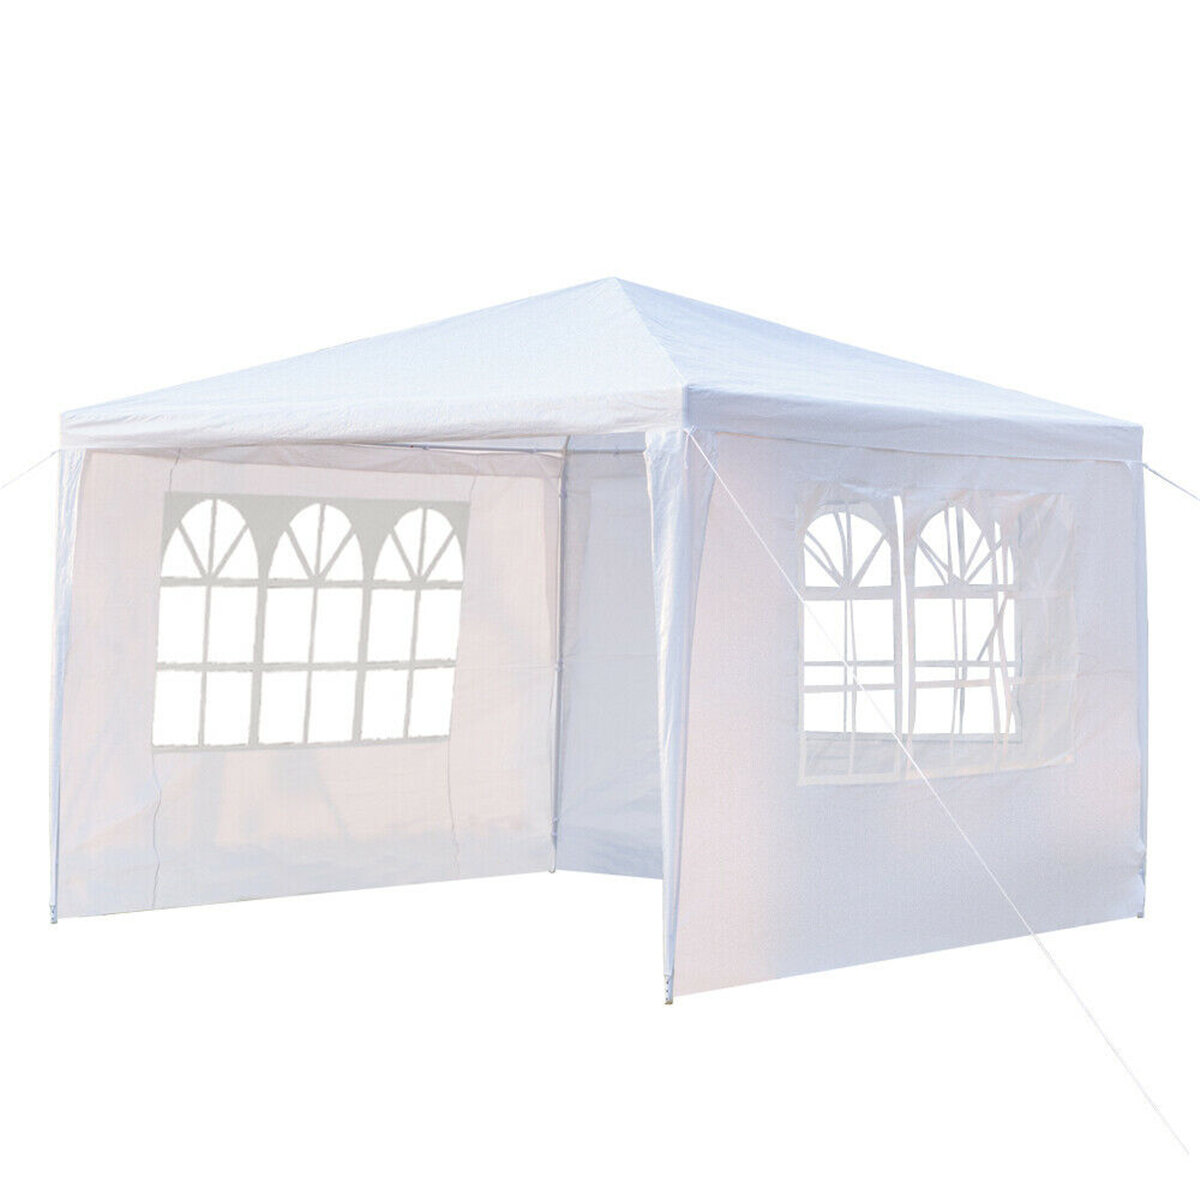 3x4m 3 Side Wall Gazebo Tent Cover WaterproofMarquee Party Wedding Sunshade Shelter Camping Tent with Window